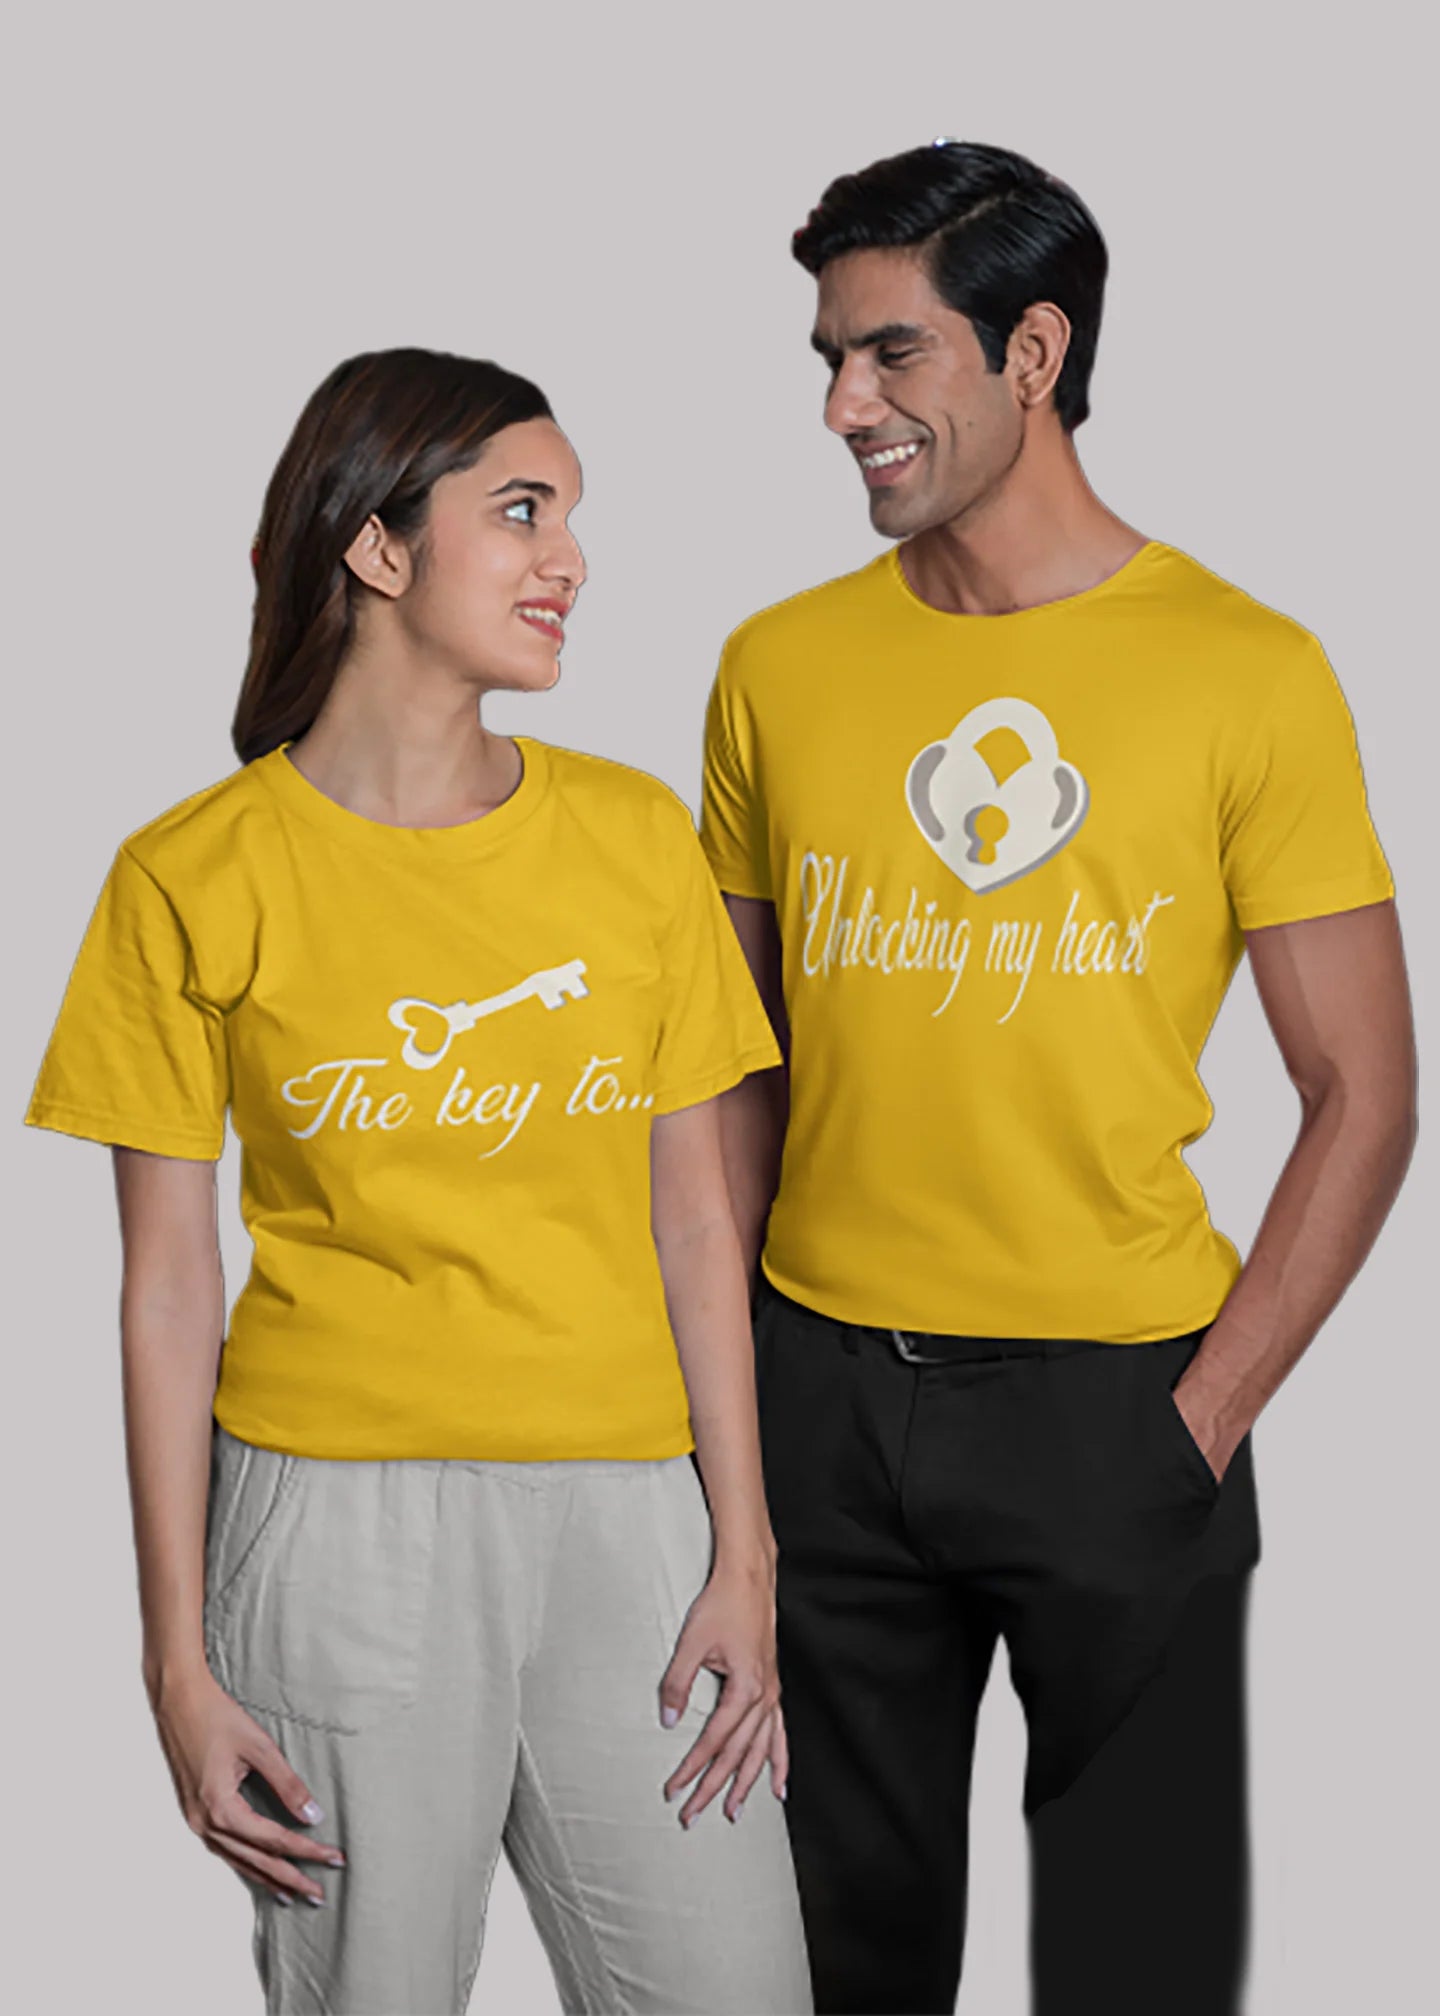 The key to unlocking my heart Printed Couple T-shirt